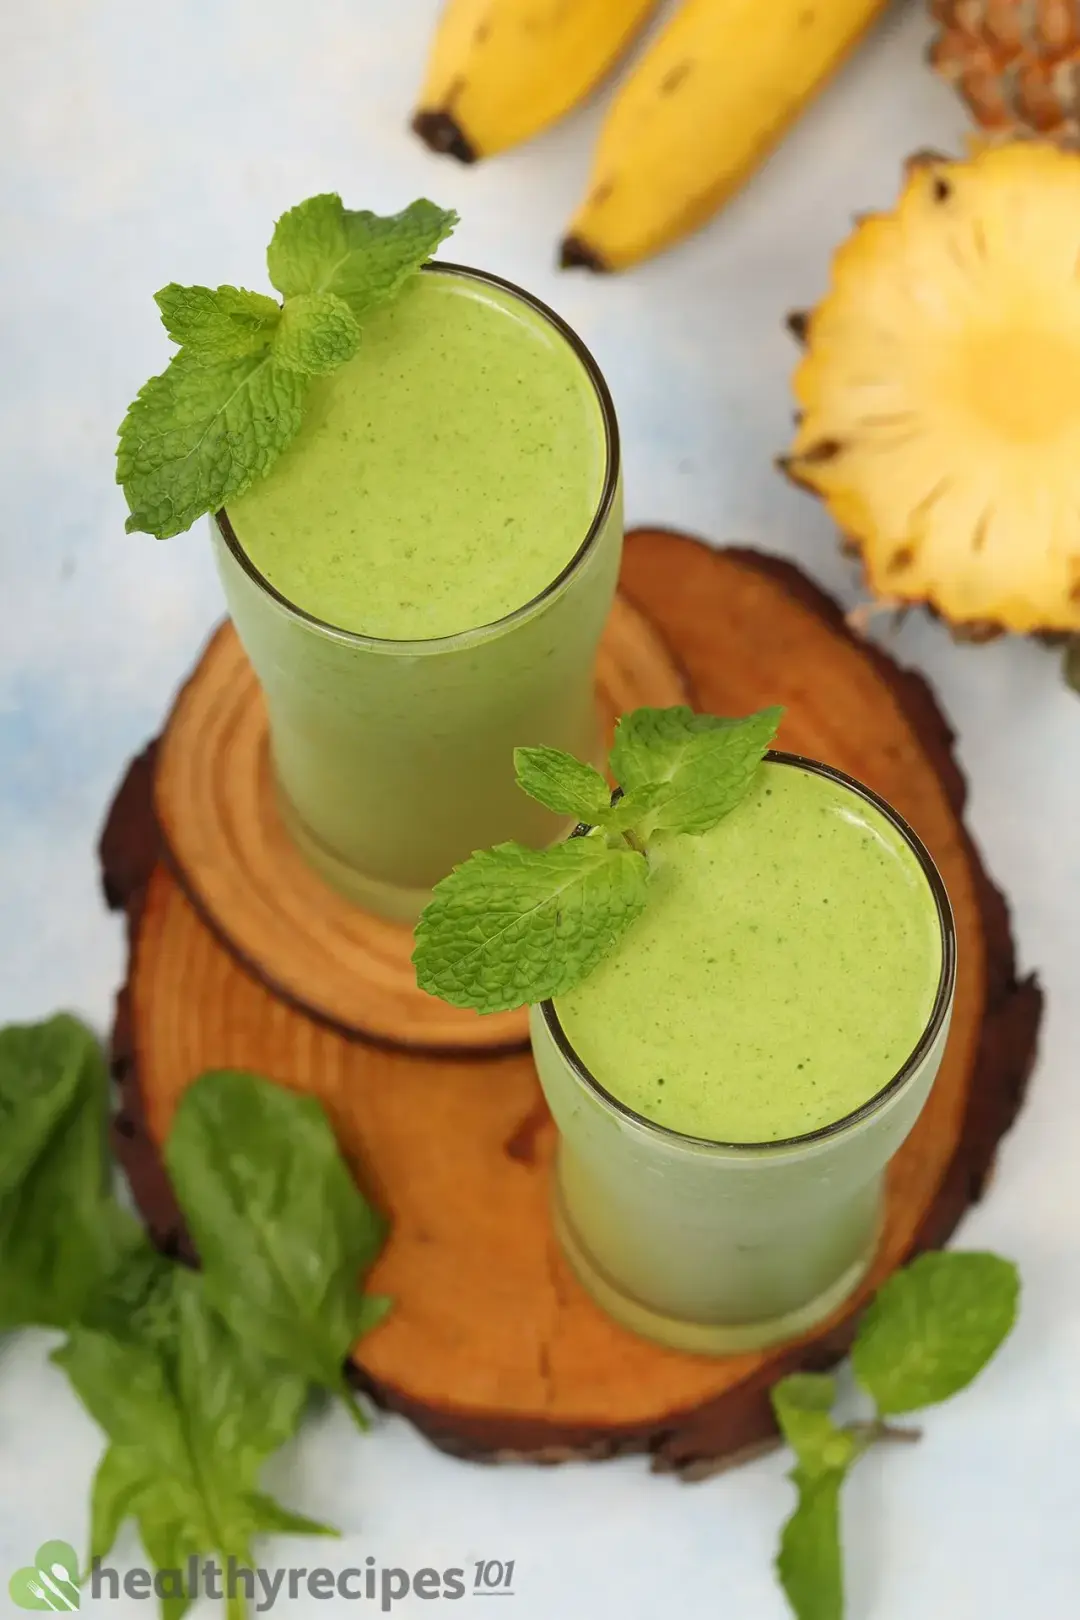 benefits of banana in Spinach Smoothie